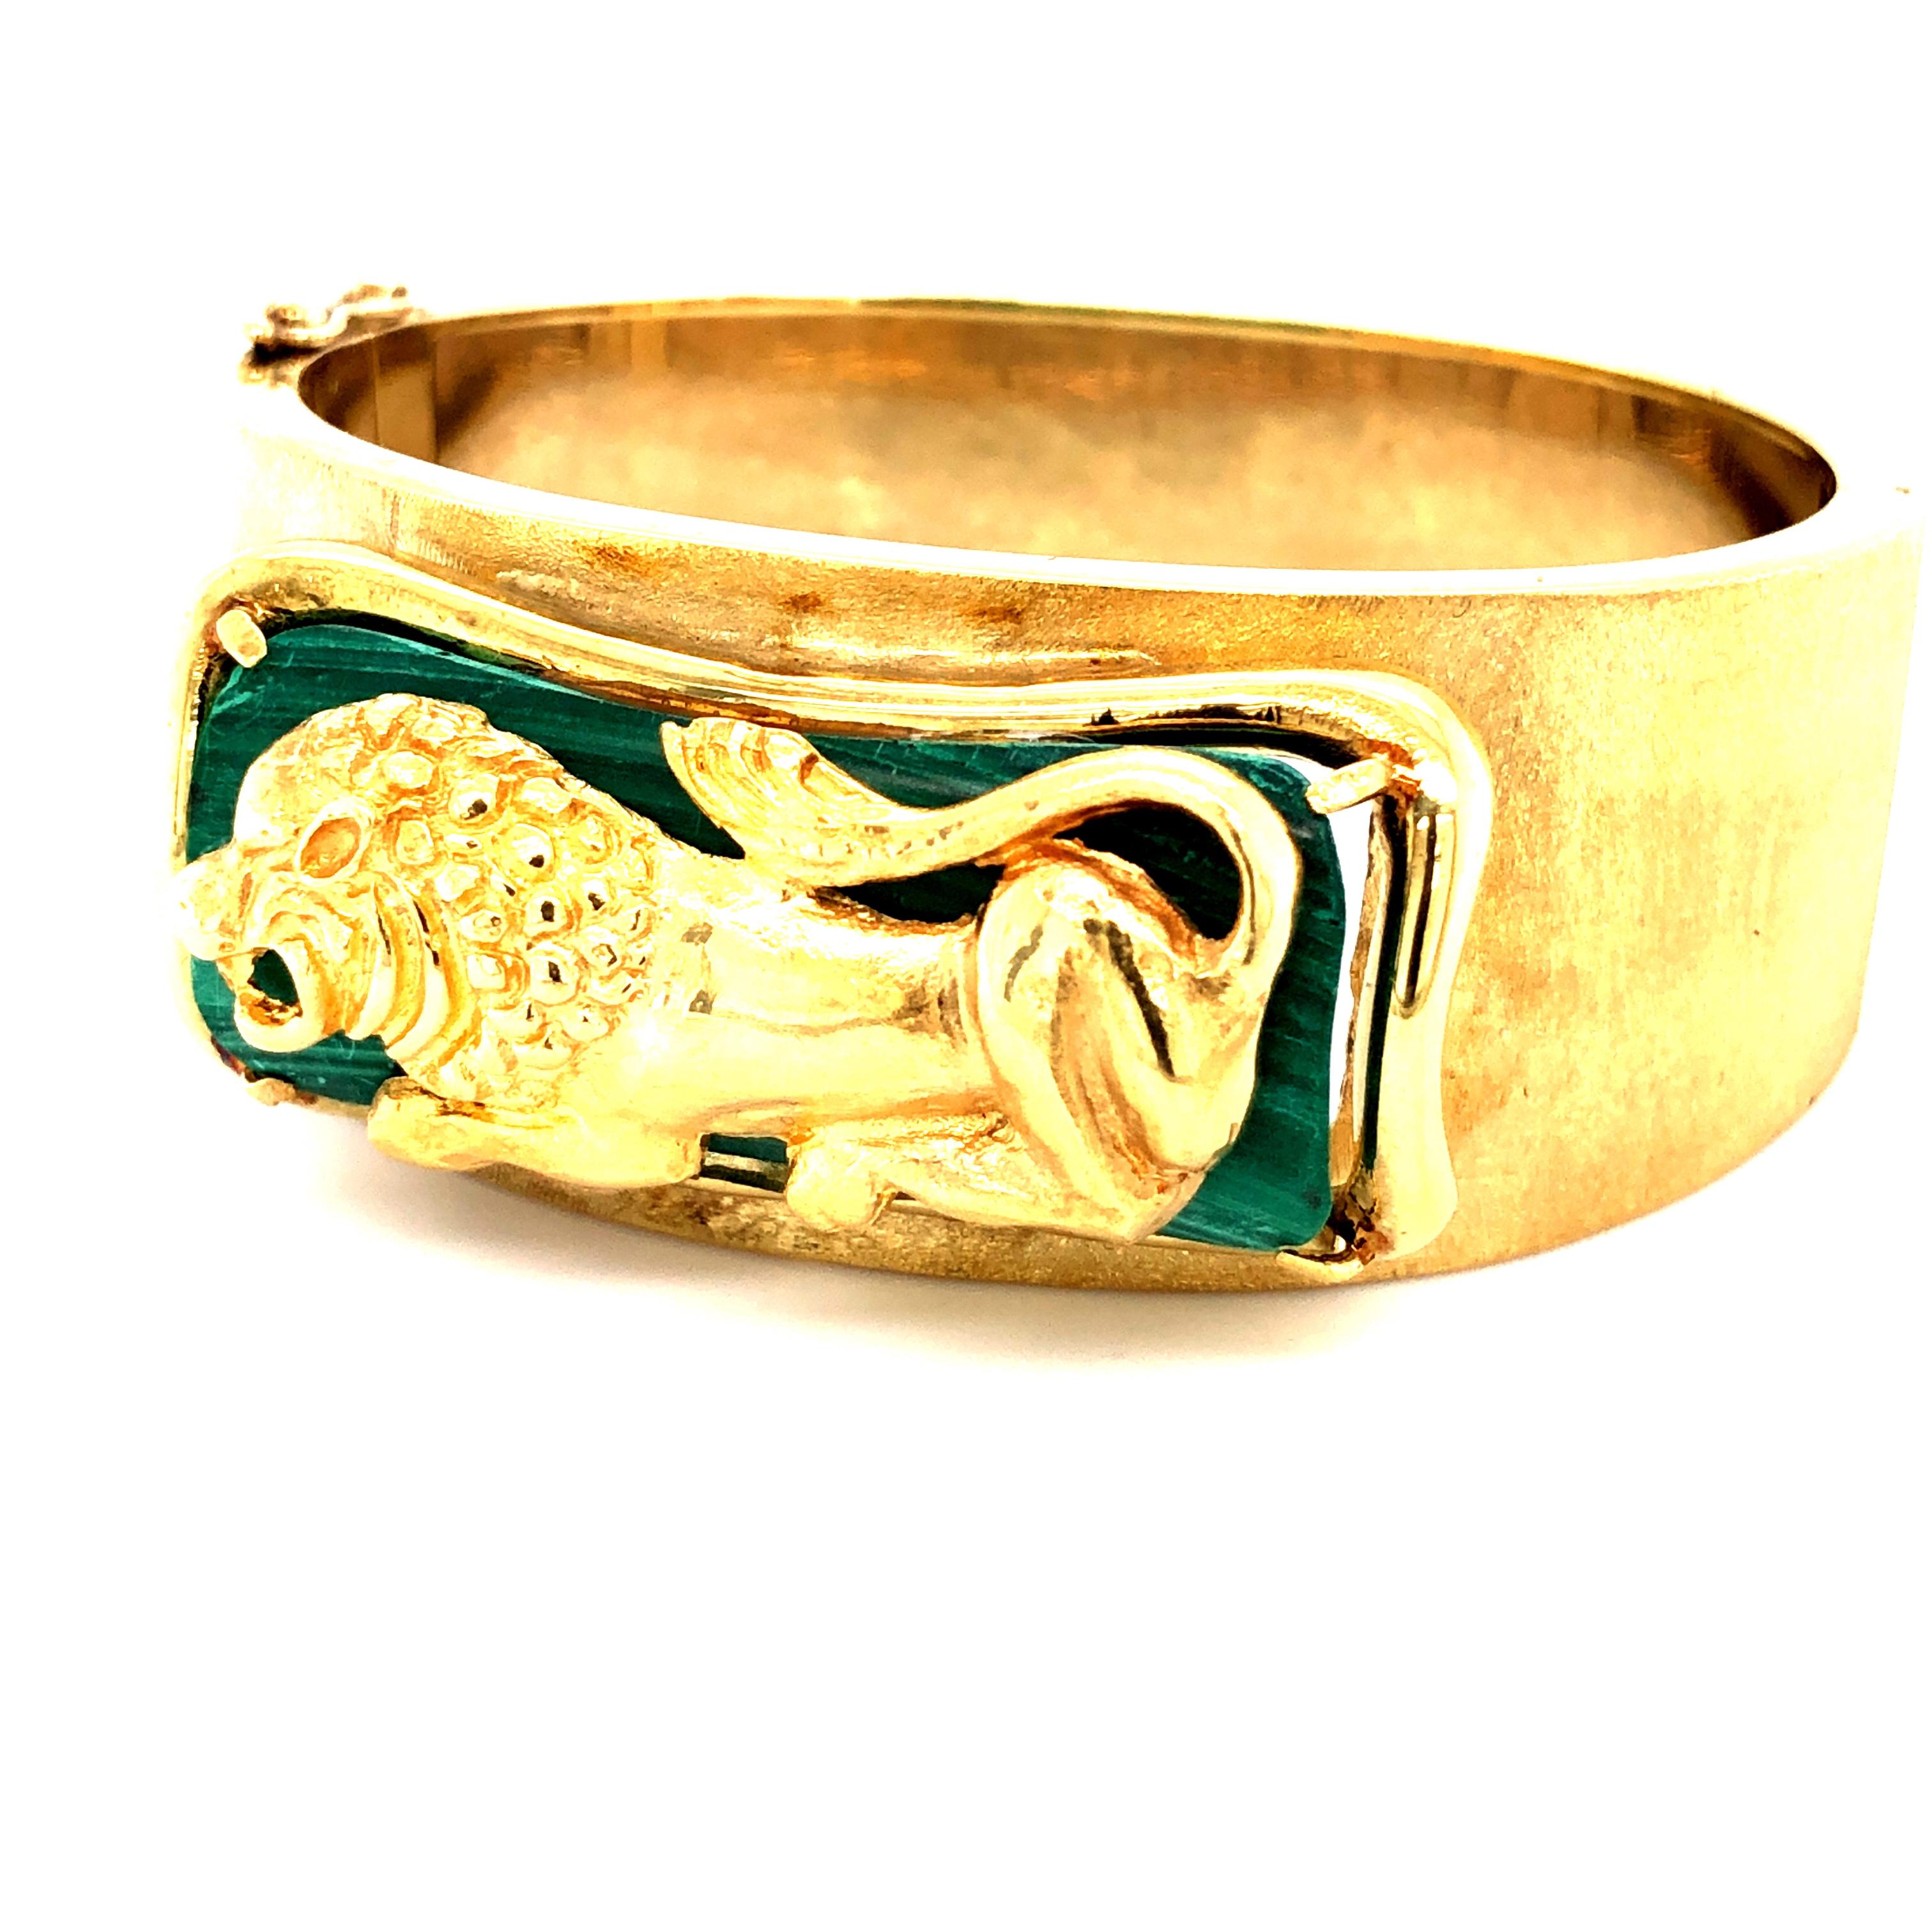 Offered here is a vintage wide cuff bangle bracelet, circa 1960-70.
Made in solid 14kt yellow, gold centered with a Byzantine Lion laying on a natural Malachite gemstone.
Bracelet is 1 inch wide at the top center and graduates down to 5/8 inch at